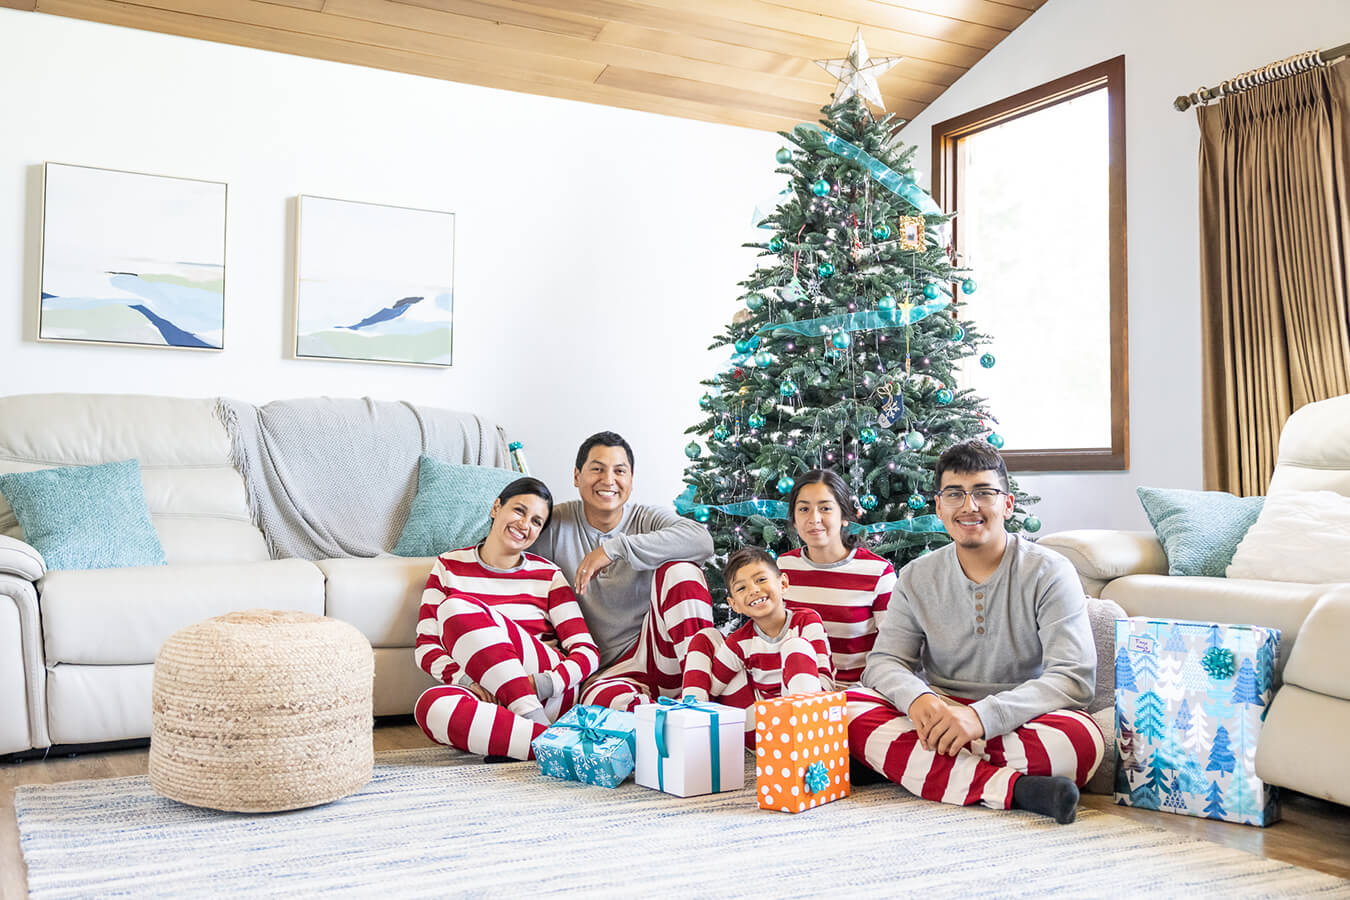 Tiago and his family with Christmas tree